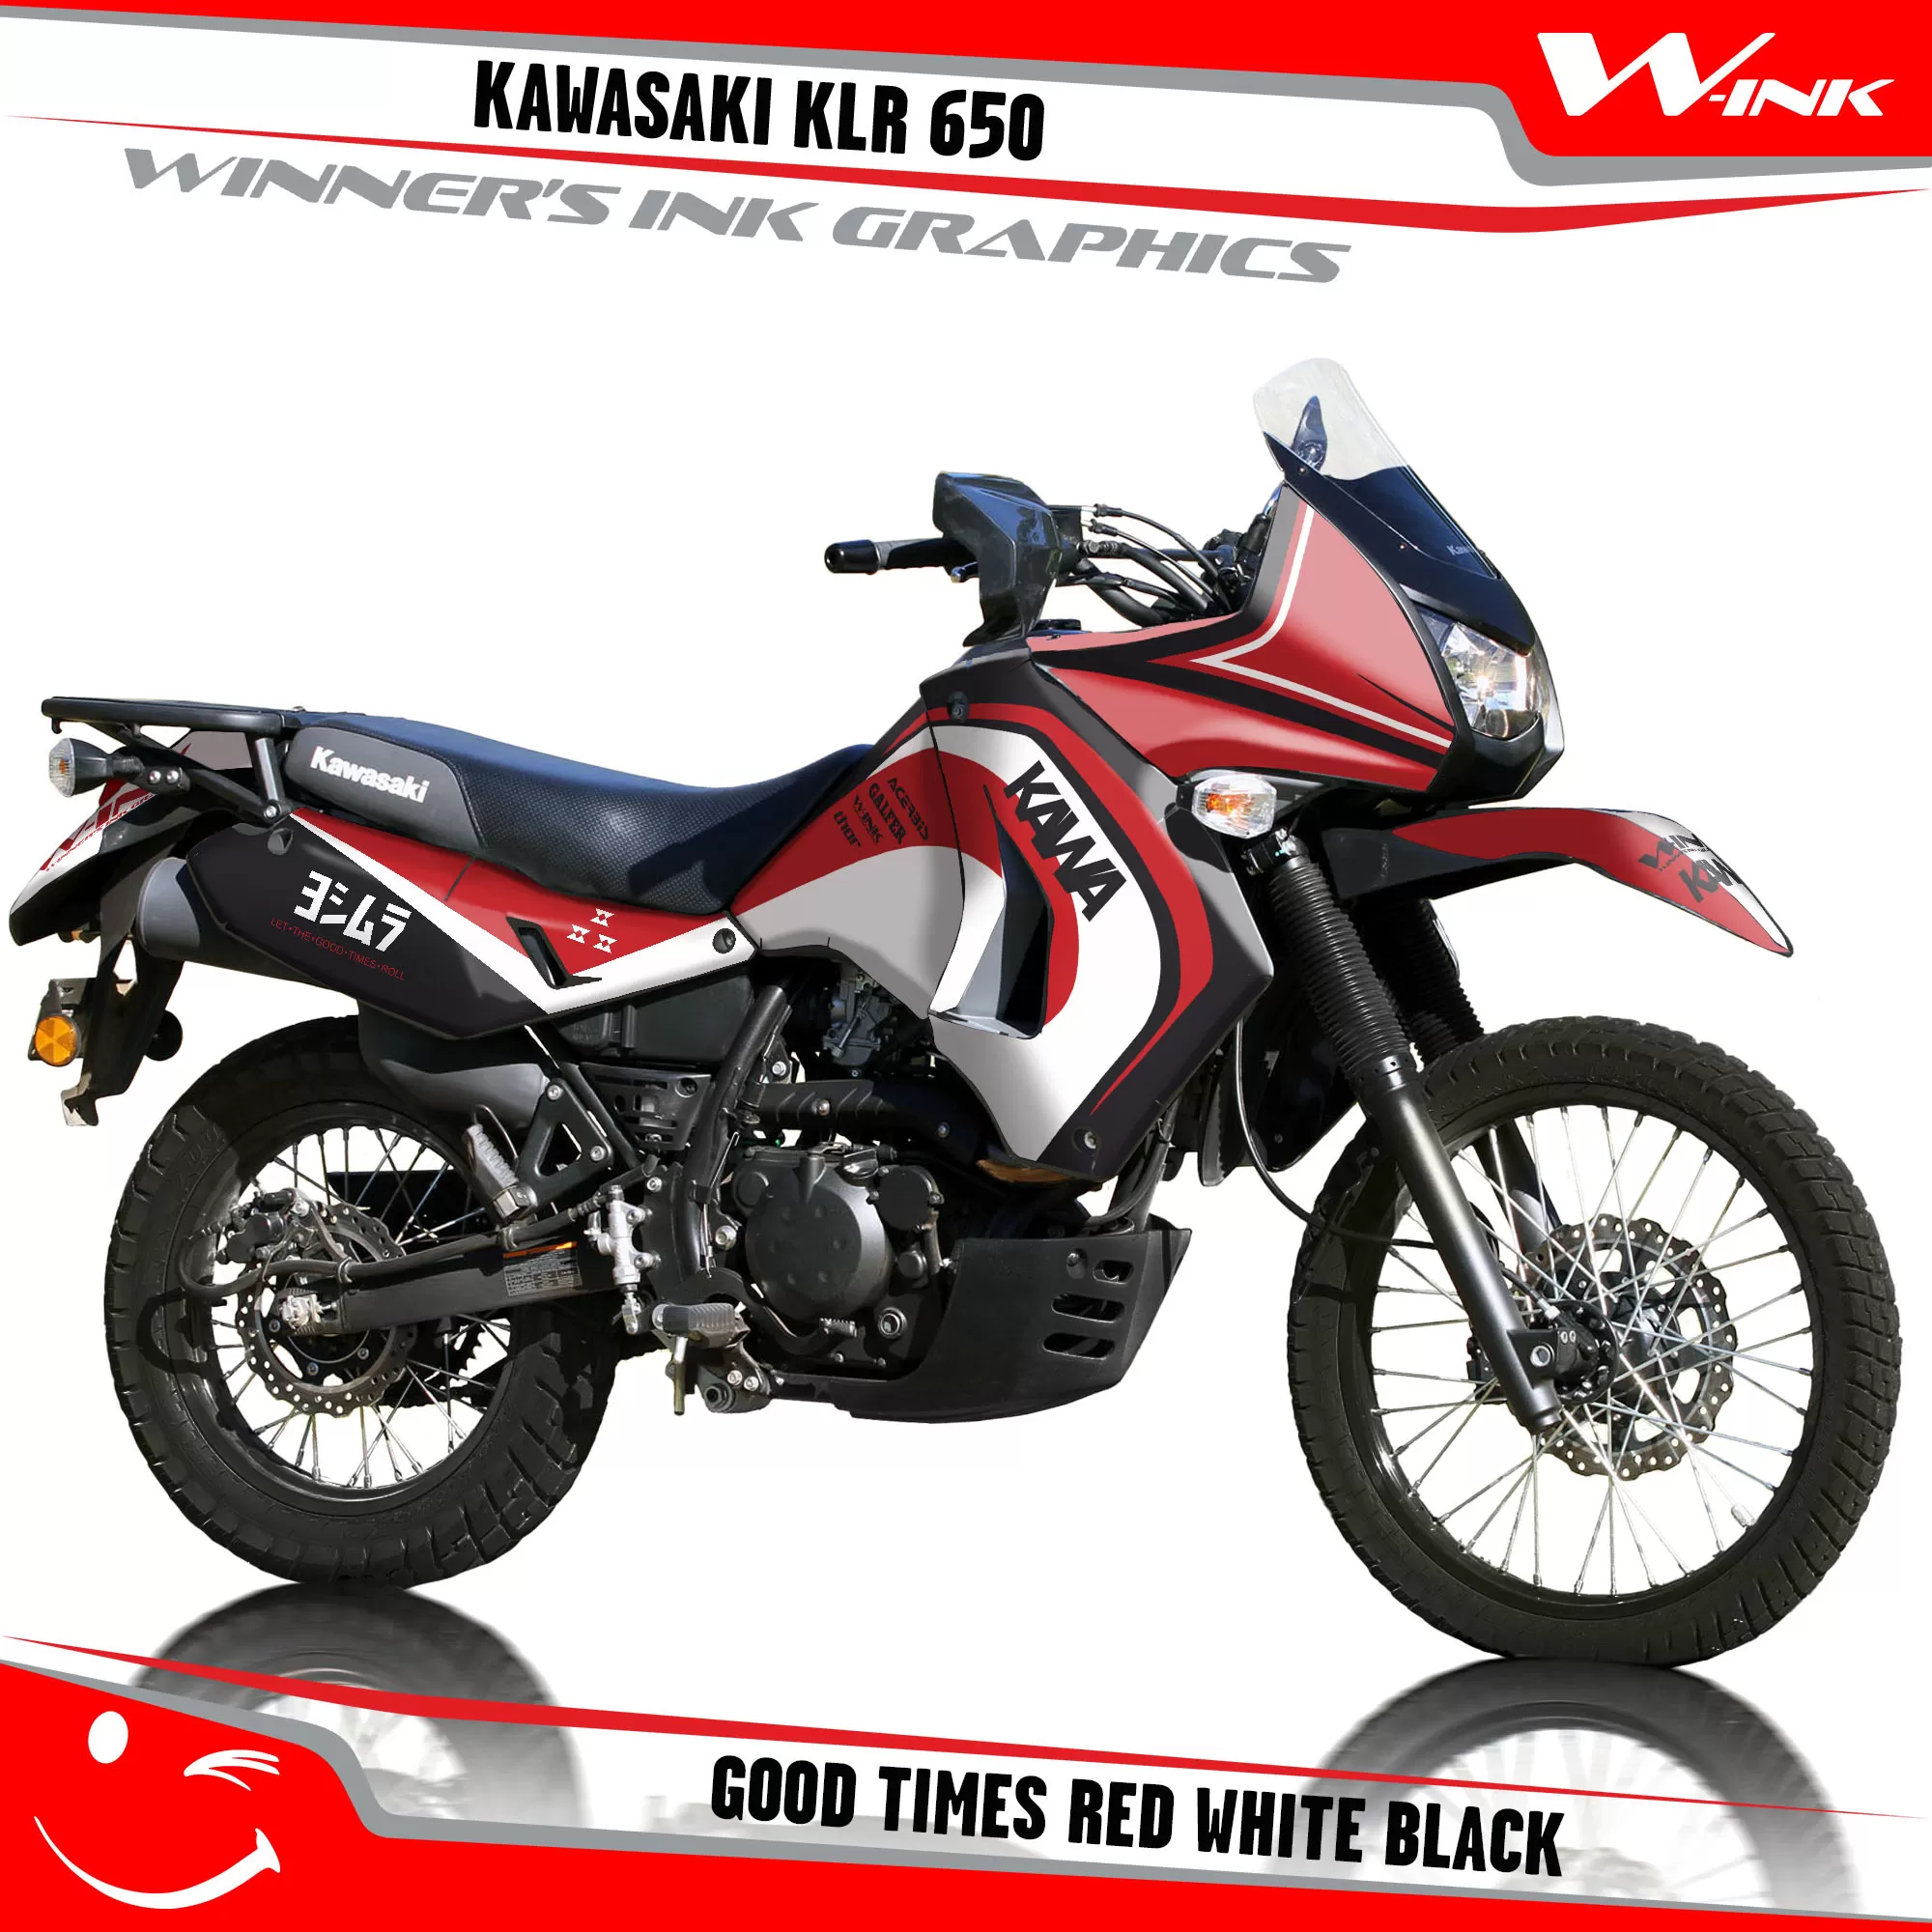 Kawasaki-KLR-650-2008-2009-2010-2011-2012-2013-2014-2015-2016-2017-2018-graphics-kit-and-decals-Good-Times-Red-White-Black